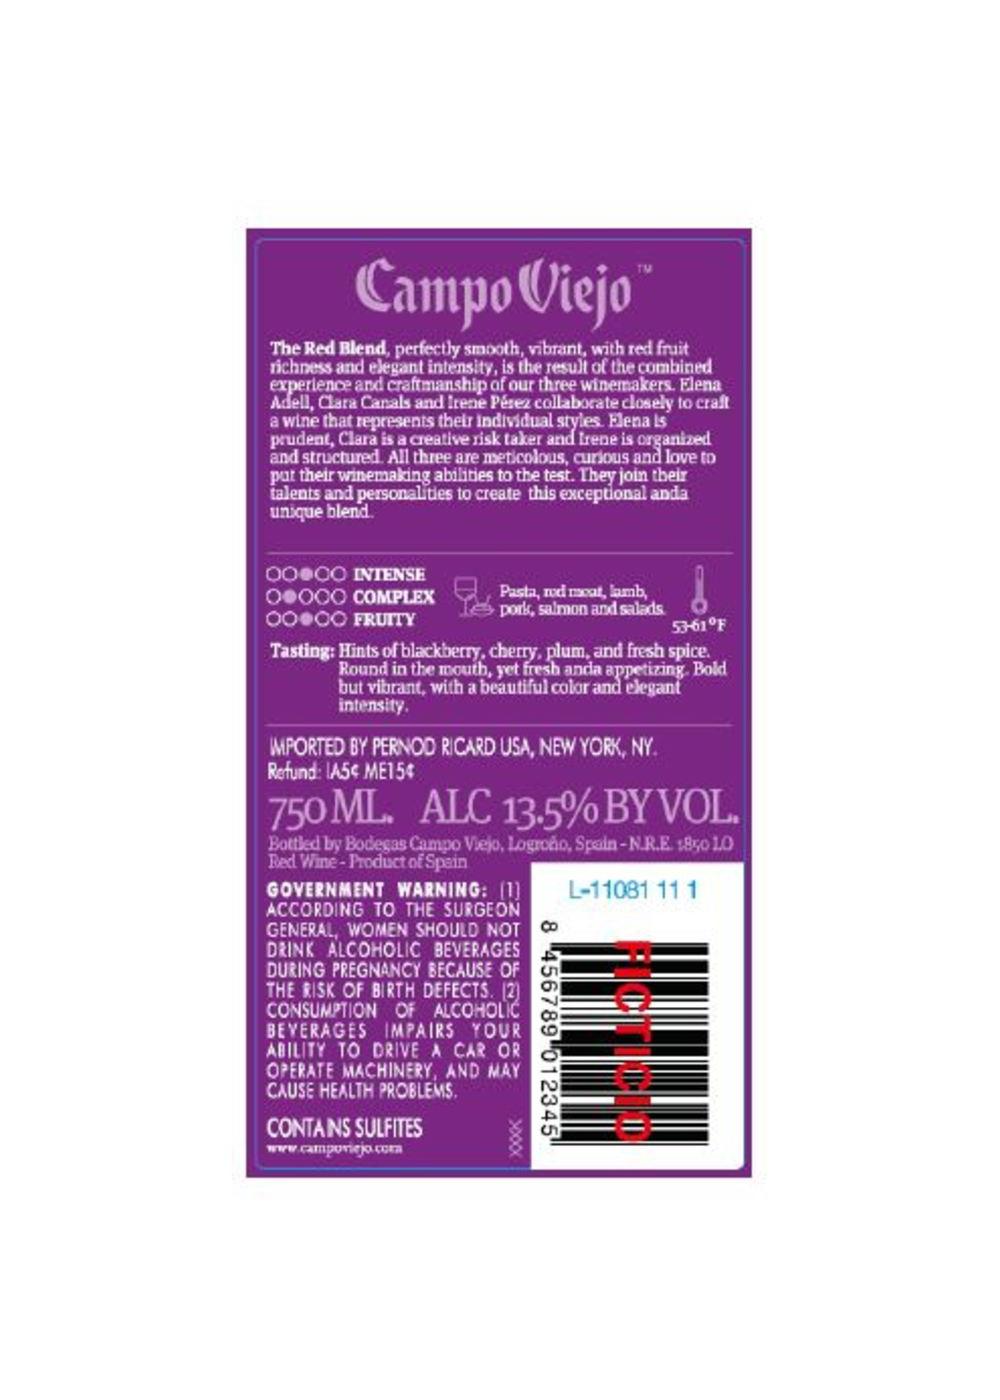 Campo Viejo Red Blend Wine; image 4 of 5